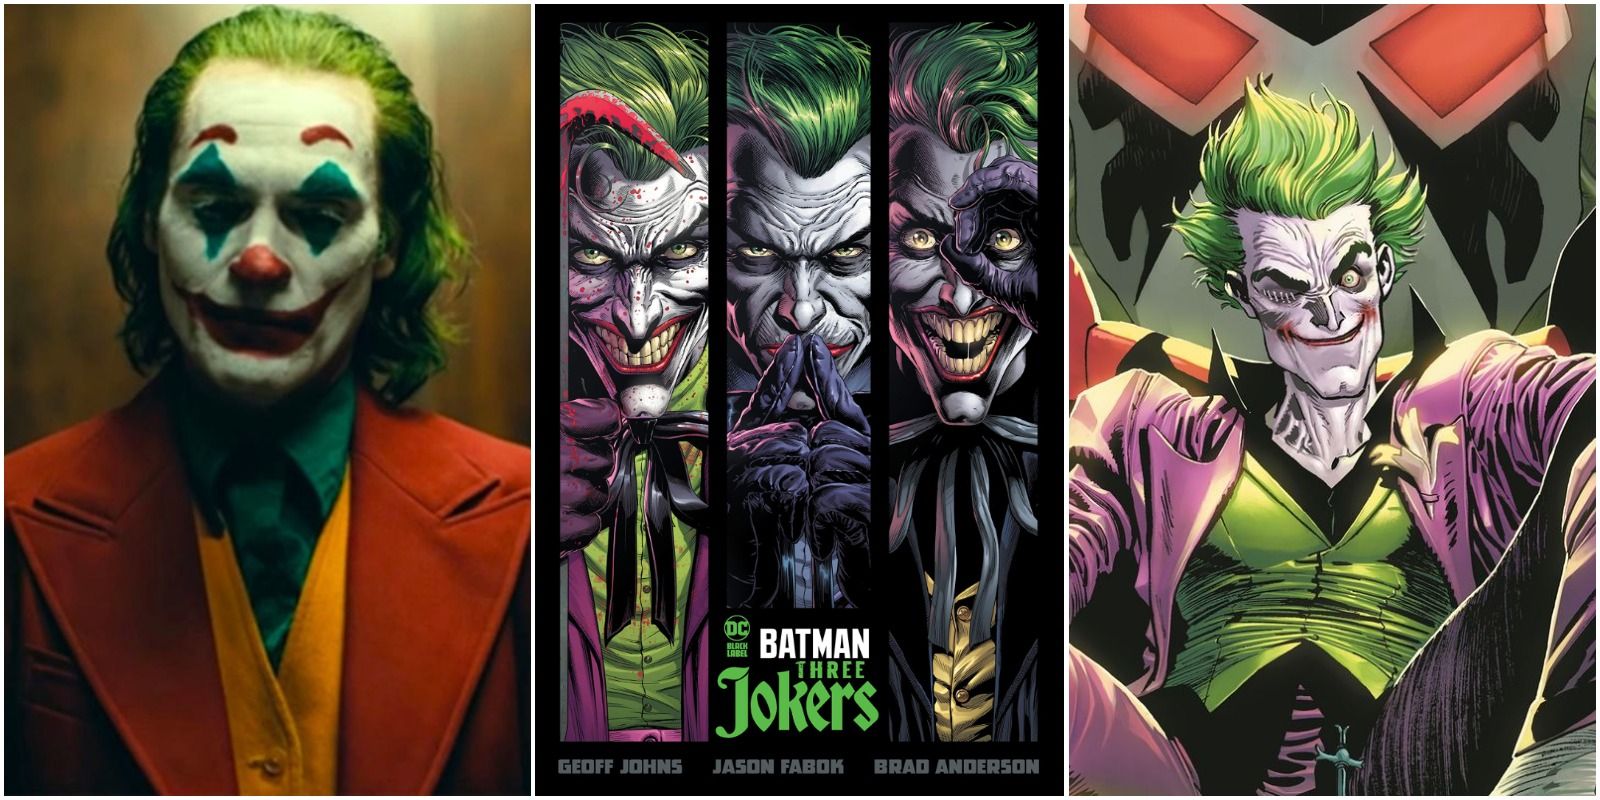 Joaquin Phoenix as the titular supervillain in 2019's Joker, Geoff Johns and Jason Fabok's Three Jokers comic and the upcoming 2021 Joker solo comic book series by James Tynion IV and Guillem March